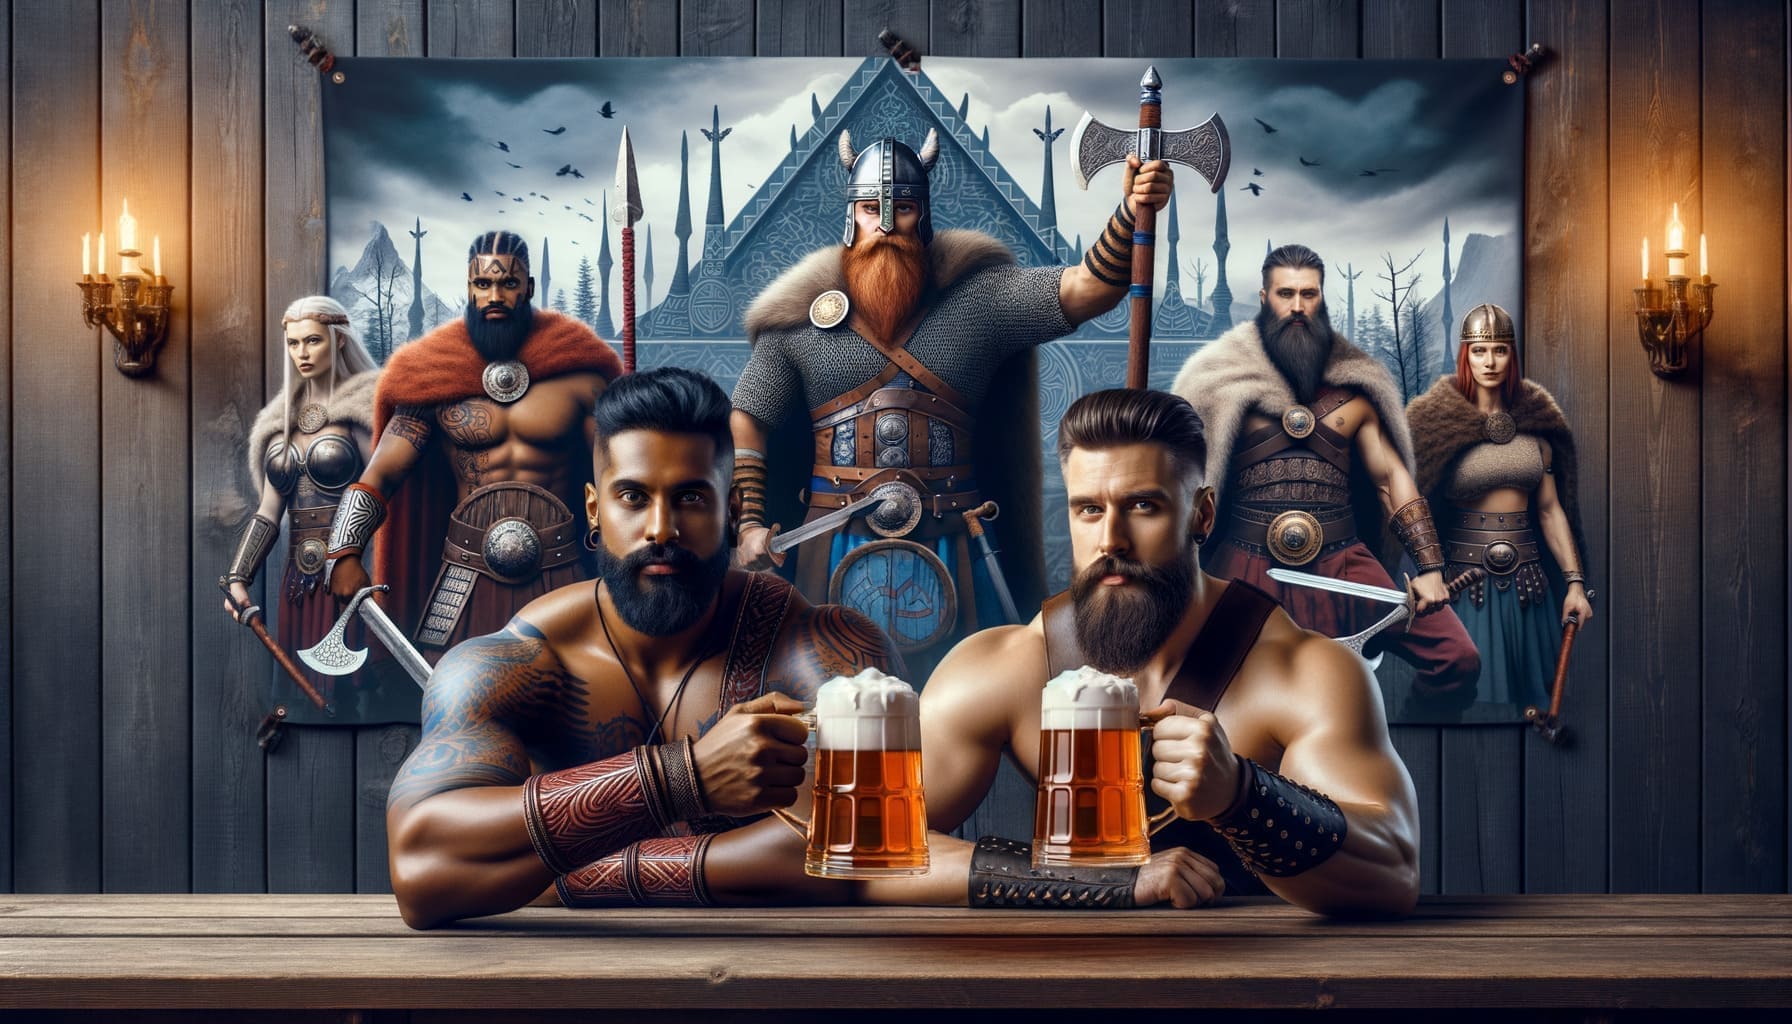 Viking Mead and Valhalla: Nectar of the Nordic Warriors